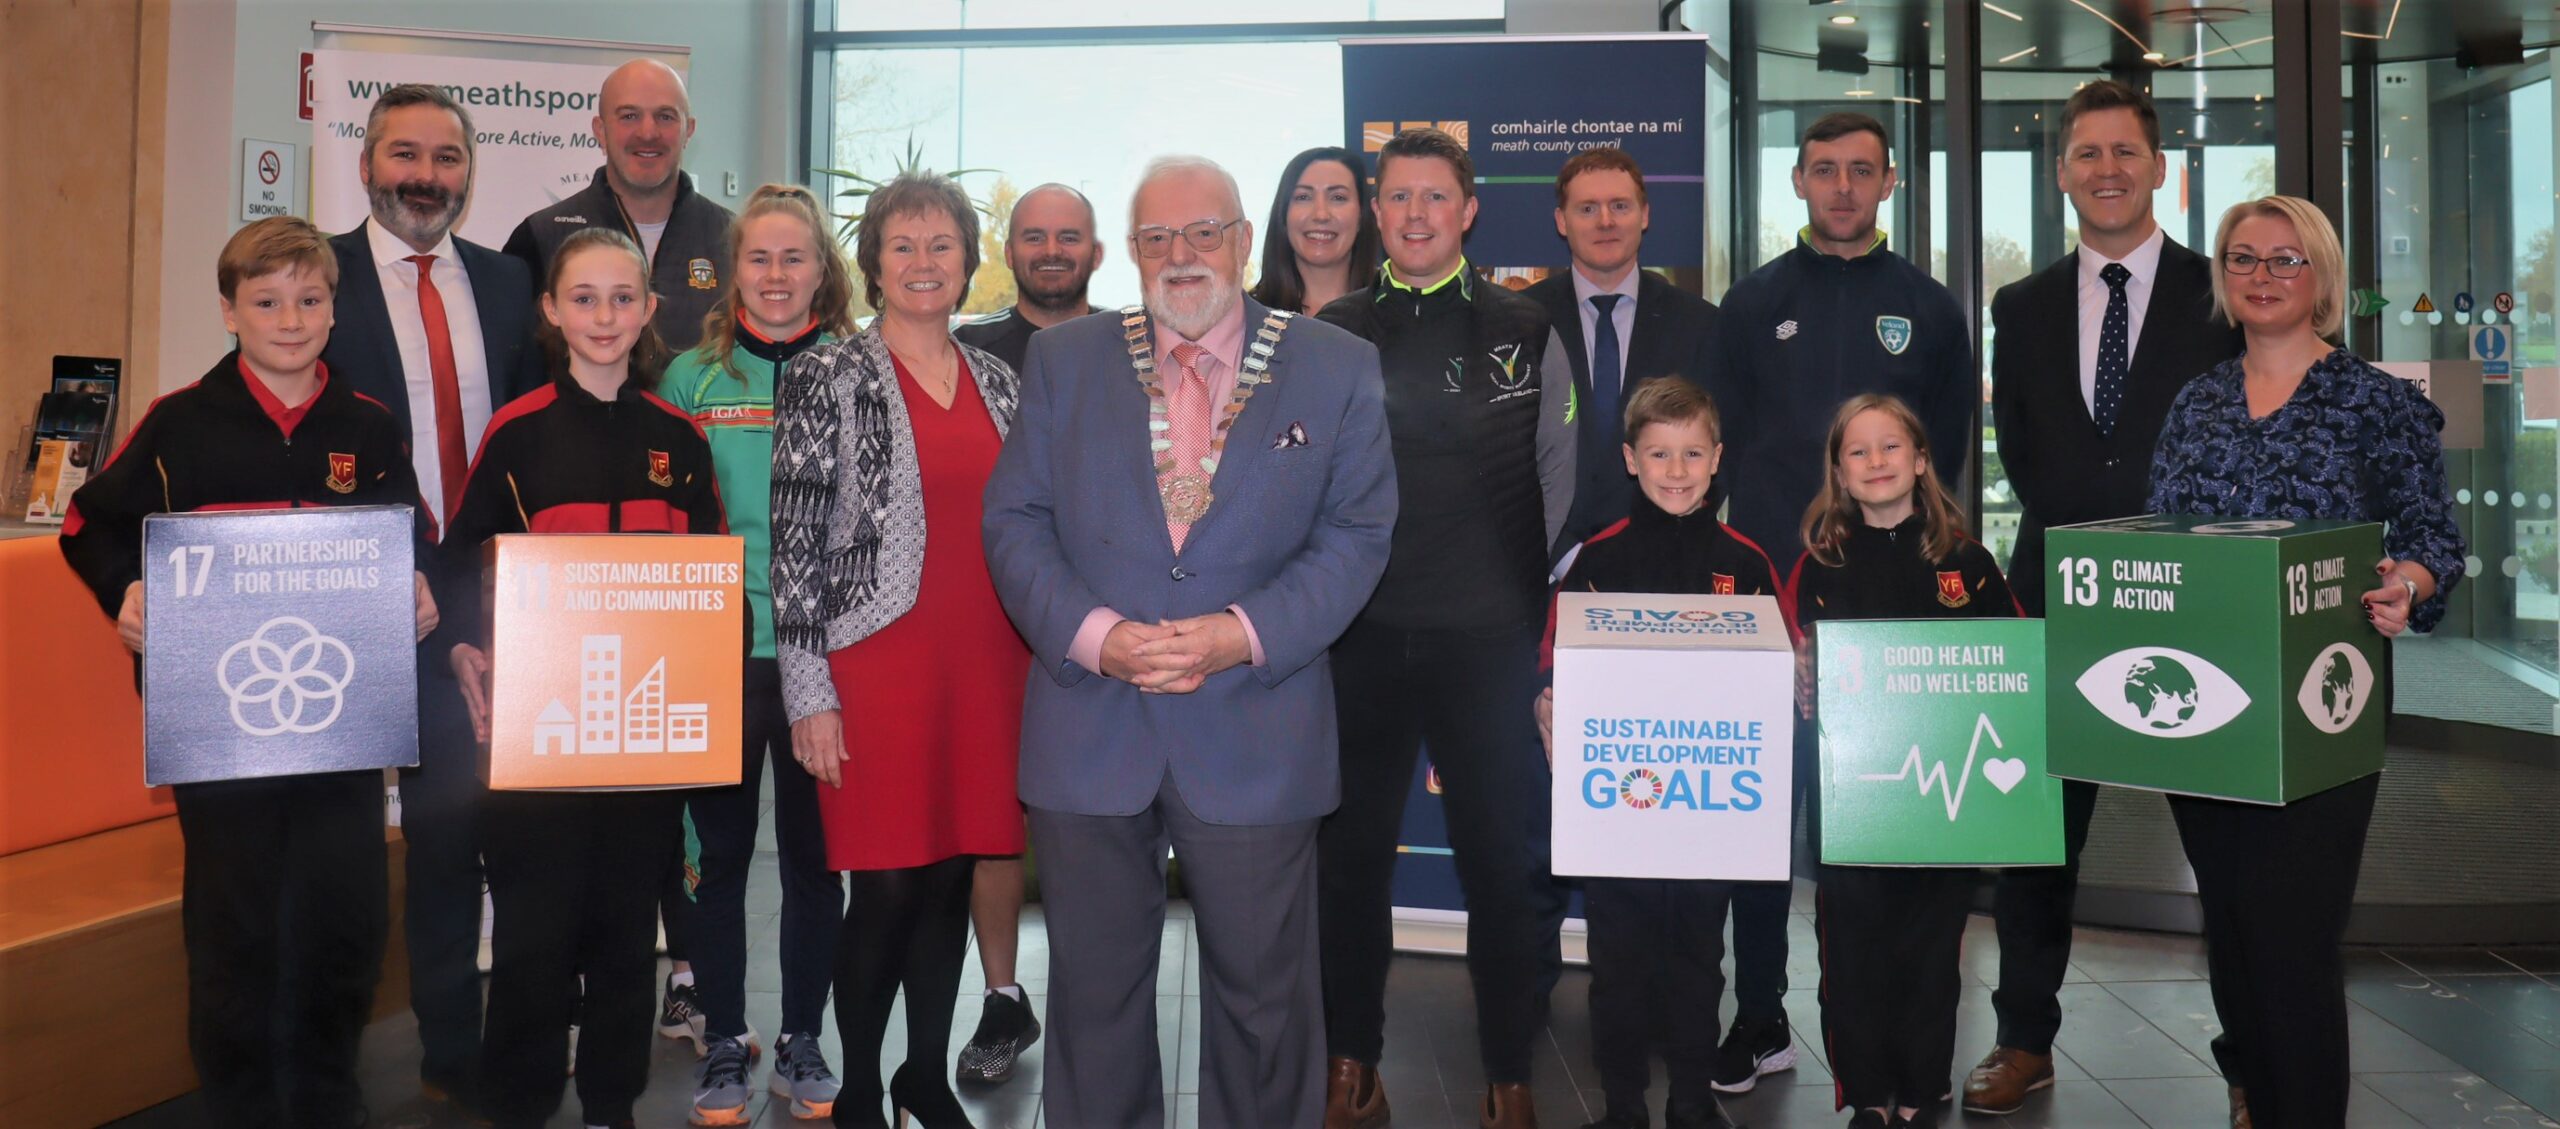 Pictured L to R – Cllr David Gilroy (Project Team), Damien Sheridan (Meath GAA GPO), Stacey Grimes (Meath LGFA GDO), Jackie Maguire (CEO, Meath County Council), Niall Kane (Leinster Rugby DO], Cllr Nick Killian (Cathaoirleach, Meath County Council), Alison Lynch (Meath LSP Board Member), Ruairi Murphy (Meath LSP Programme Manager), Dara McGowan (Director of Services, Meath County Council), Richie Smith (FAI DO), Patrick Haslett (Managing Partner, Impact 3 Zero), Mary D’Arcy (Climate Change Co-Ordinator, Meath County Council) with pupils of Yellow Furze N.S.